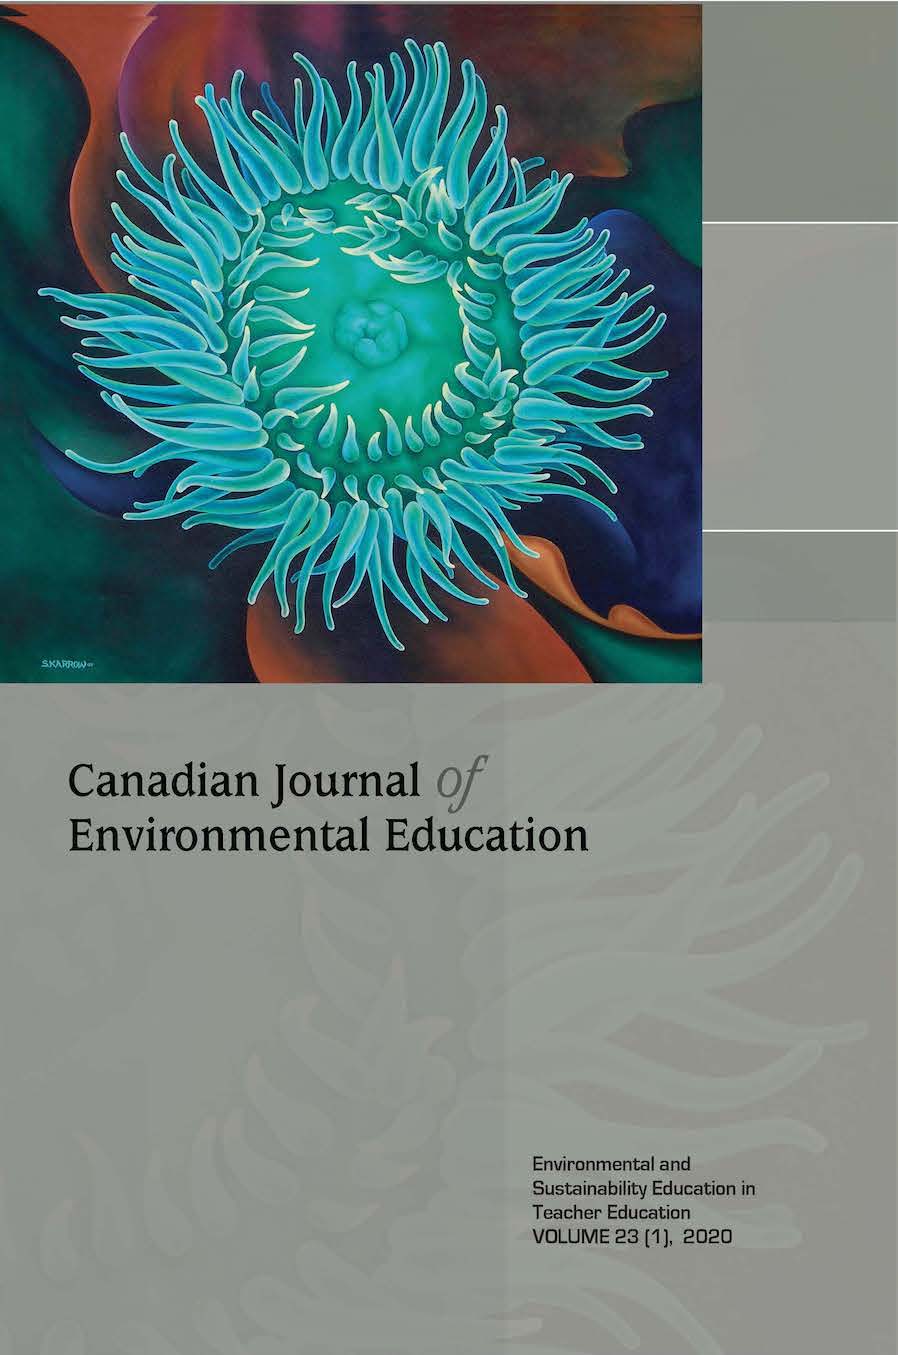 					View Vol. 23 No. 1 (2020): Environmental and Sustainability Education in Teacher Education
				